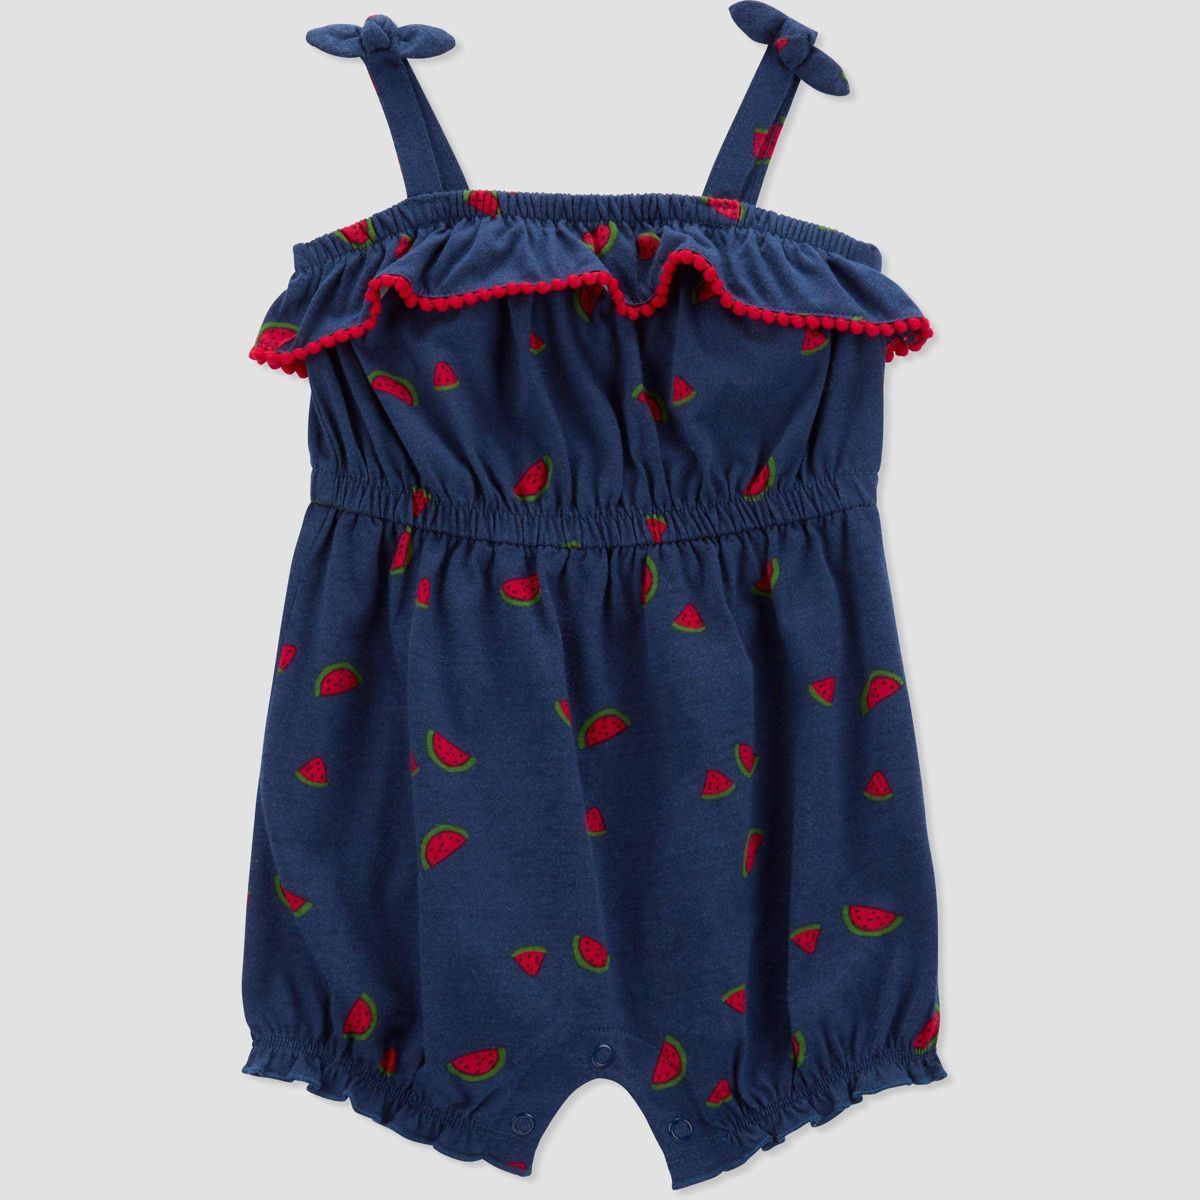 Carter's Just One You® Baby Girls' Watermelon Romper - Navy Blue | Target